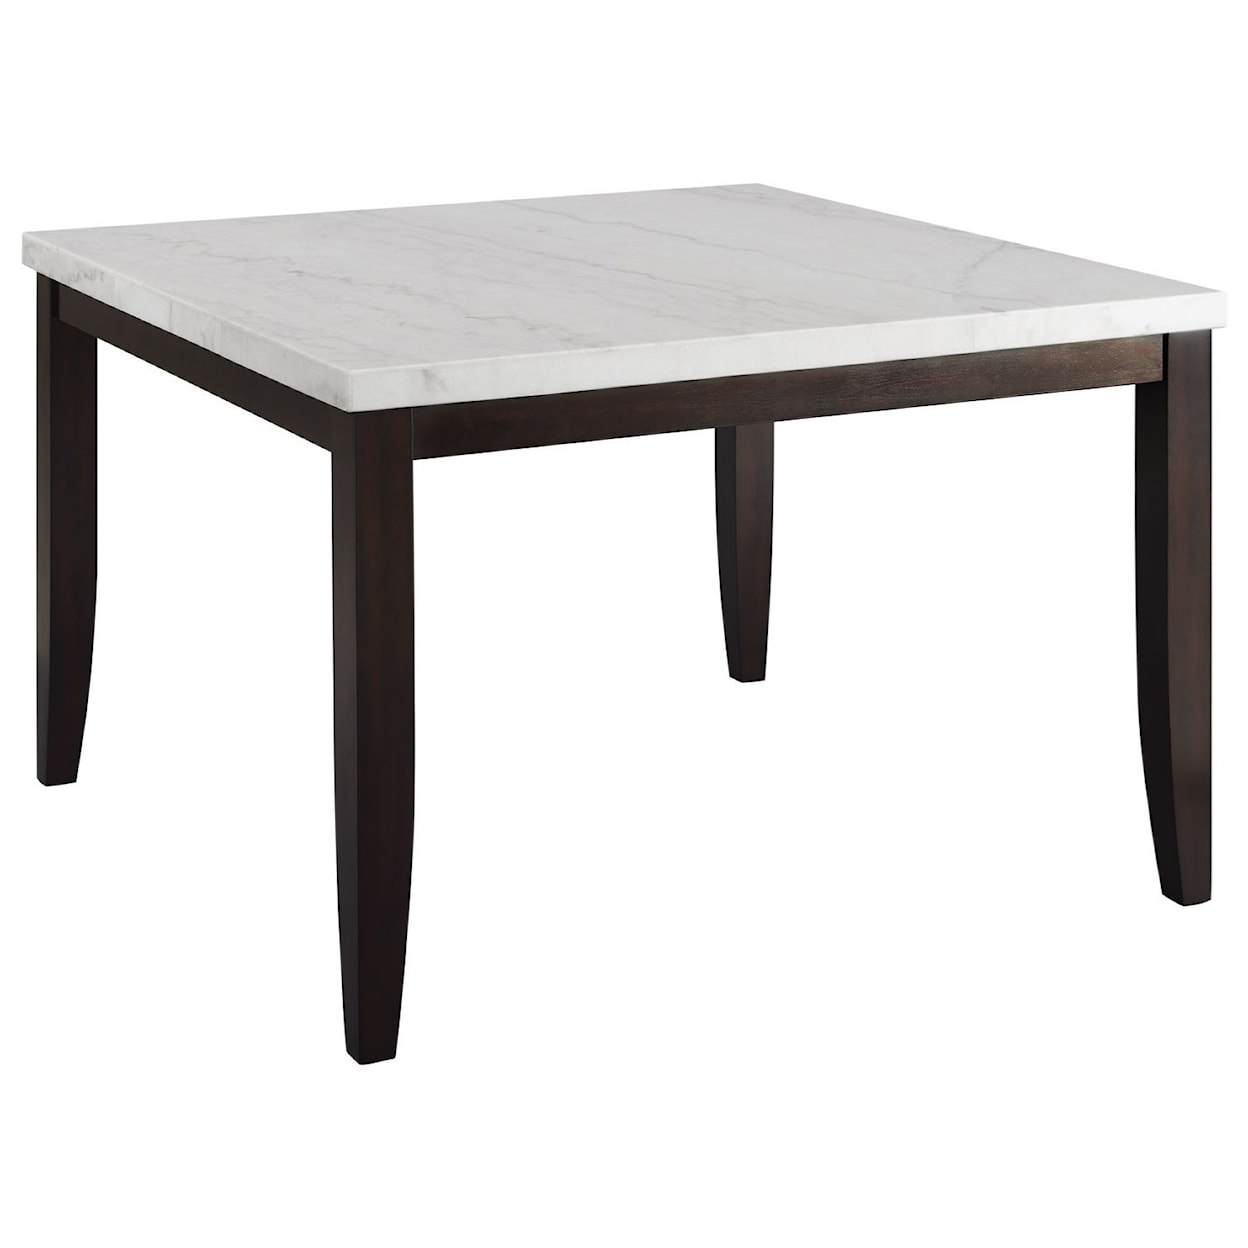 Steve Silver Francis Counter Height Dining Table